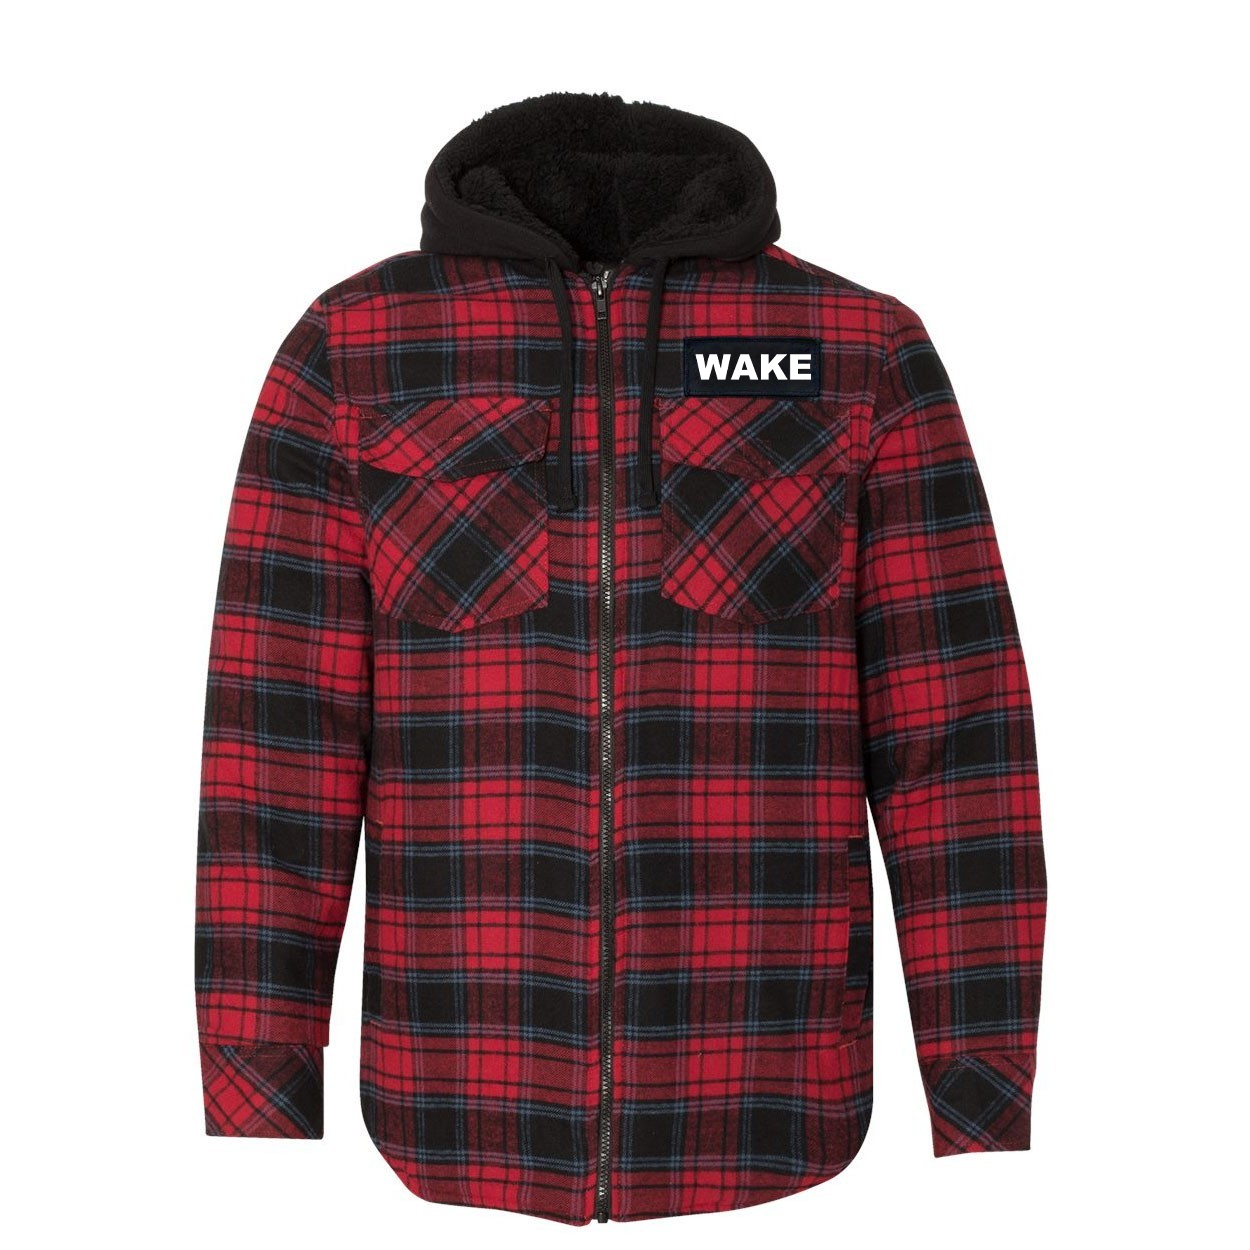 Wake Brand Logo Classic Unisex Full Zip Woven Patch Hooded Flannel Jacket Red/Black Buffalo